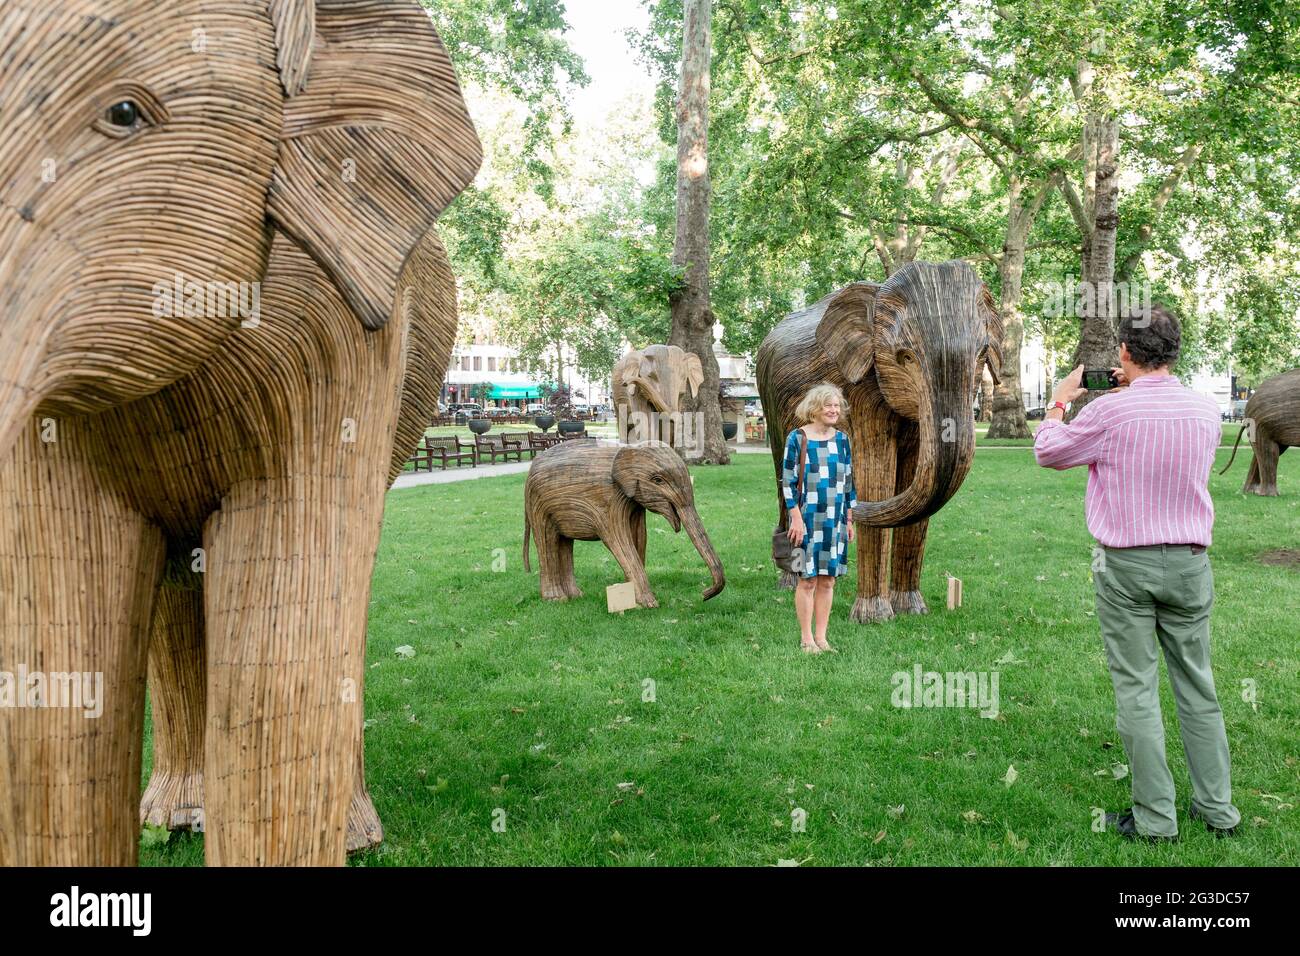 People taking photos with Lantana elephant sculptures placed in Berkeley Square in London.CoExistence is an art installation initiated by Elephant Family and The Real Elephant, consisting of 100 elephant sculptors created by indigenous people. Starting from 14th June 2021 to 23rd July 2021, the herd will be exhibited across various locations in central London, namely Green Park, St. James' Park and Berkeley Square. The movement aims to raise funds for Elephant Family in its cause of protecting wildlife from human destruction. (Photo by Belinda Jiao/SOPA Images/Sipa USA) Stock Photo